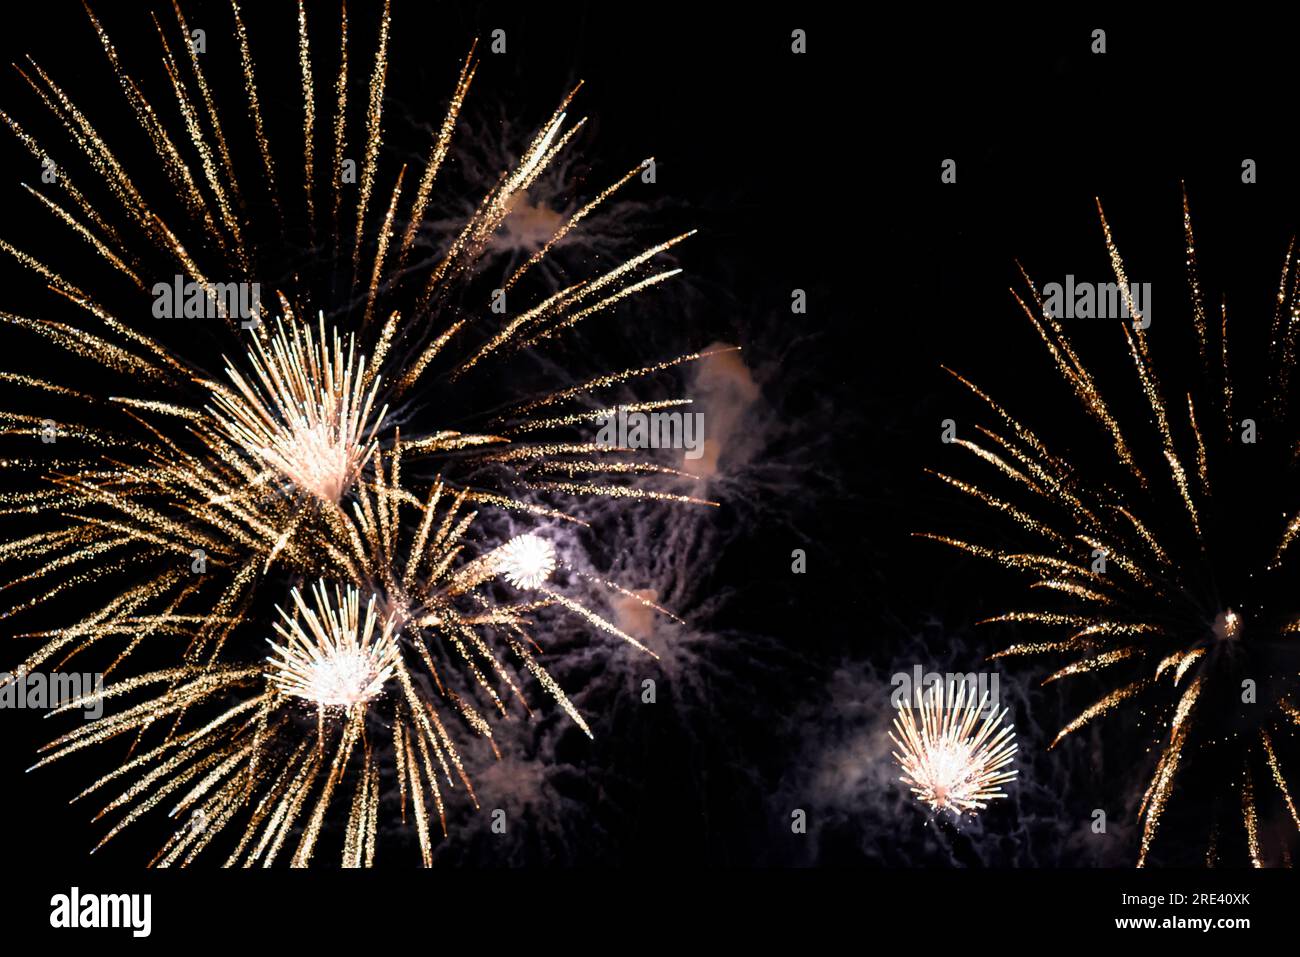 Close-up fireworks explode in the sky with motion blur on a black background. Stock Photo